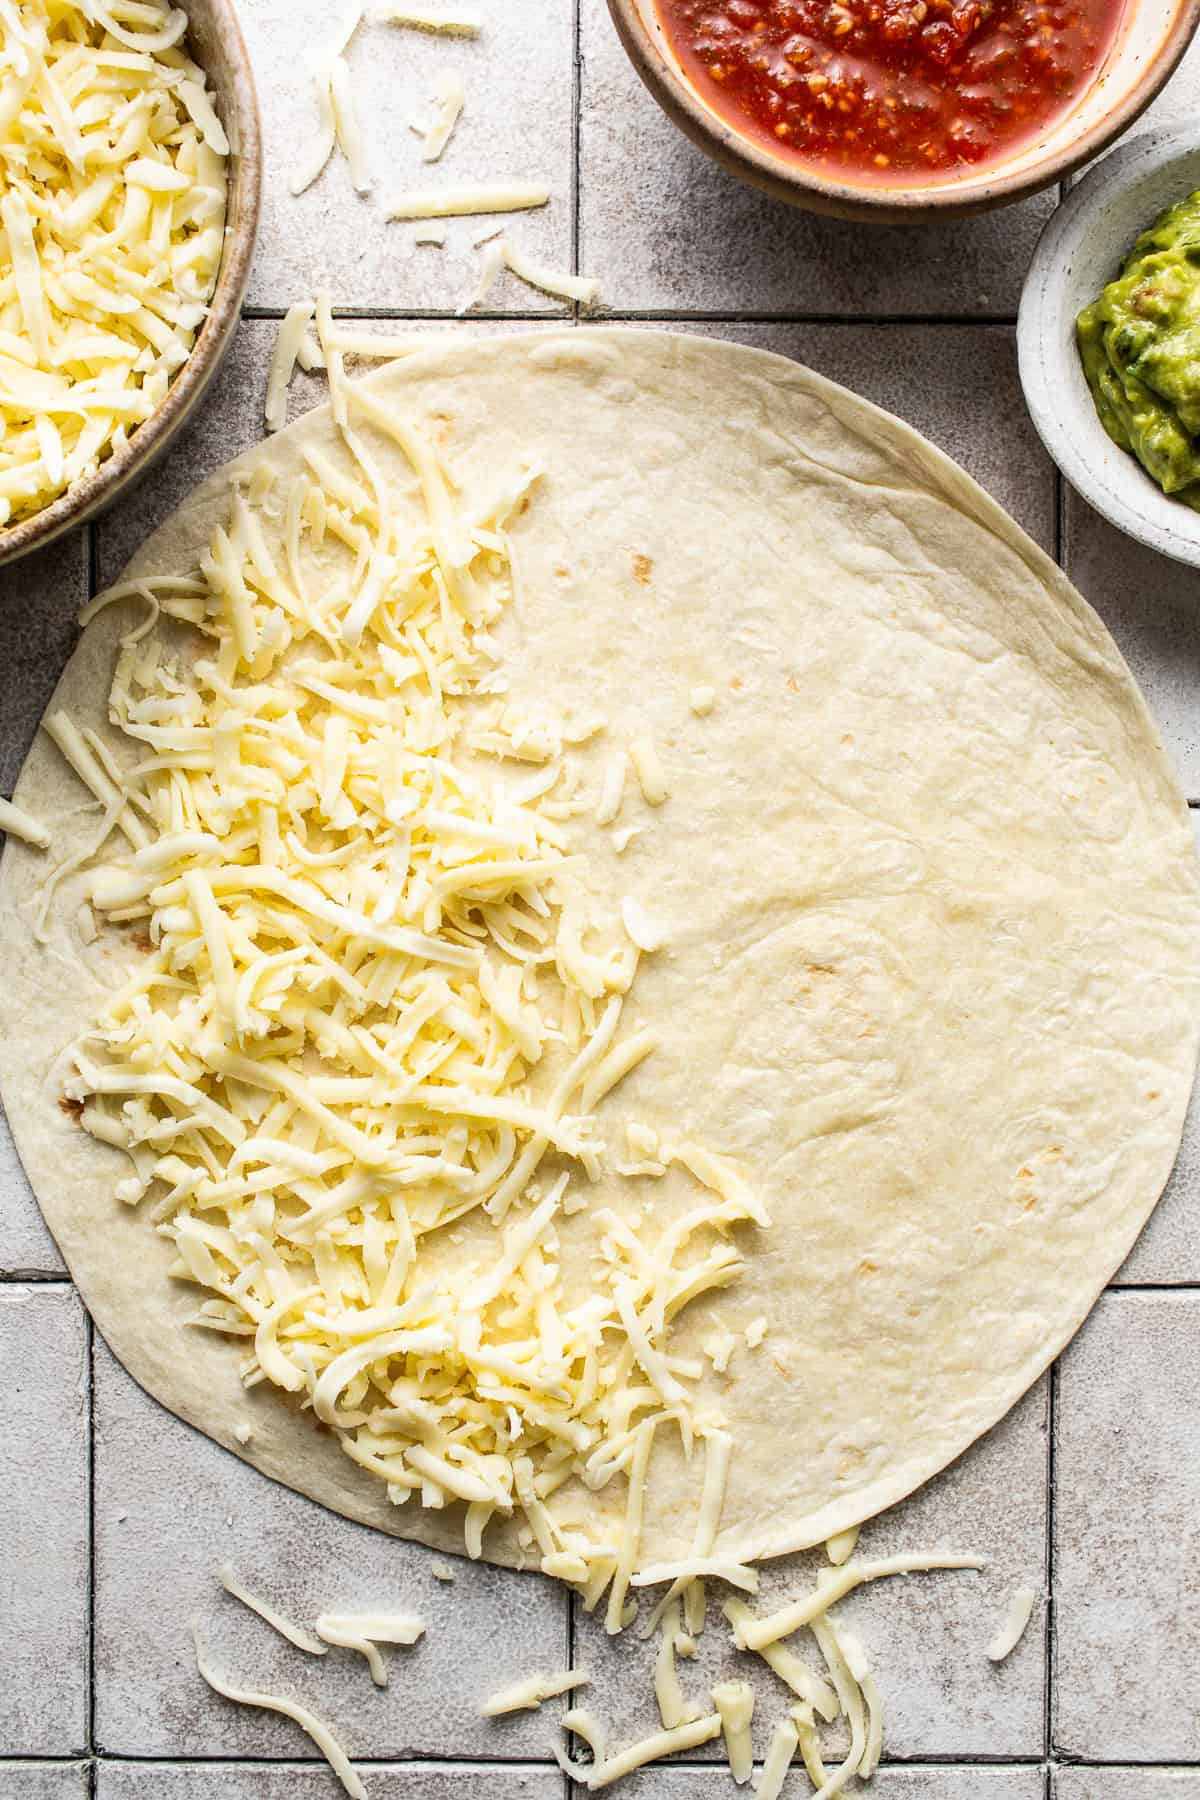 Shredded cheese on one half of a large flour tortilla to make quesadillas.